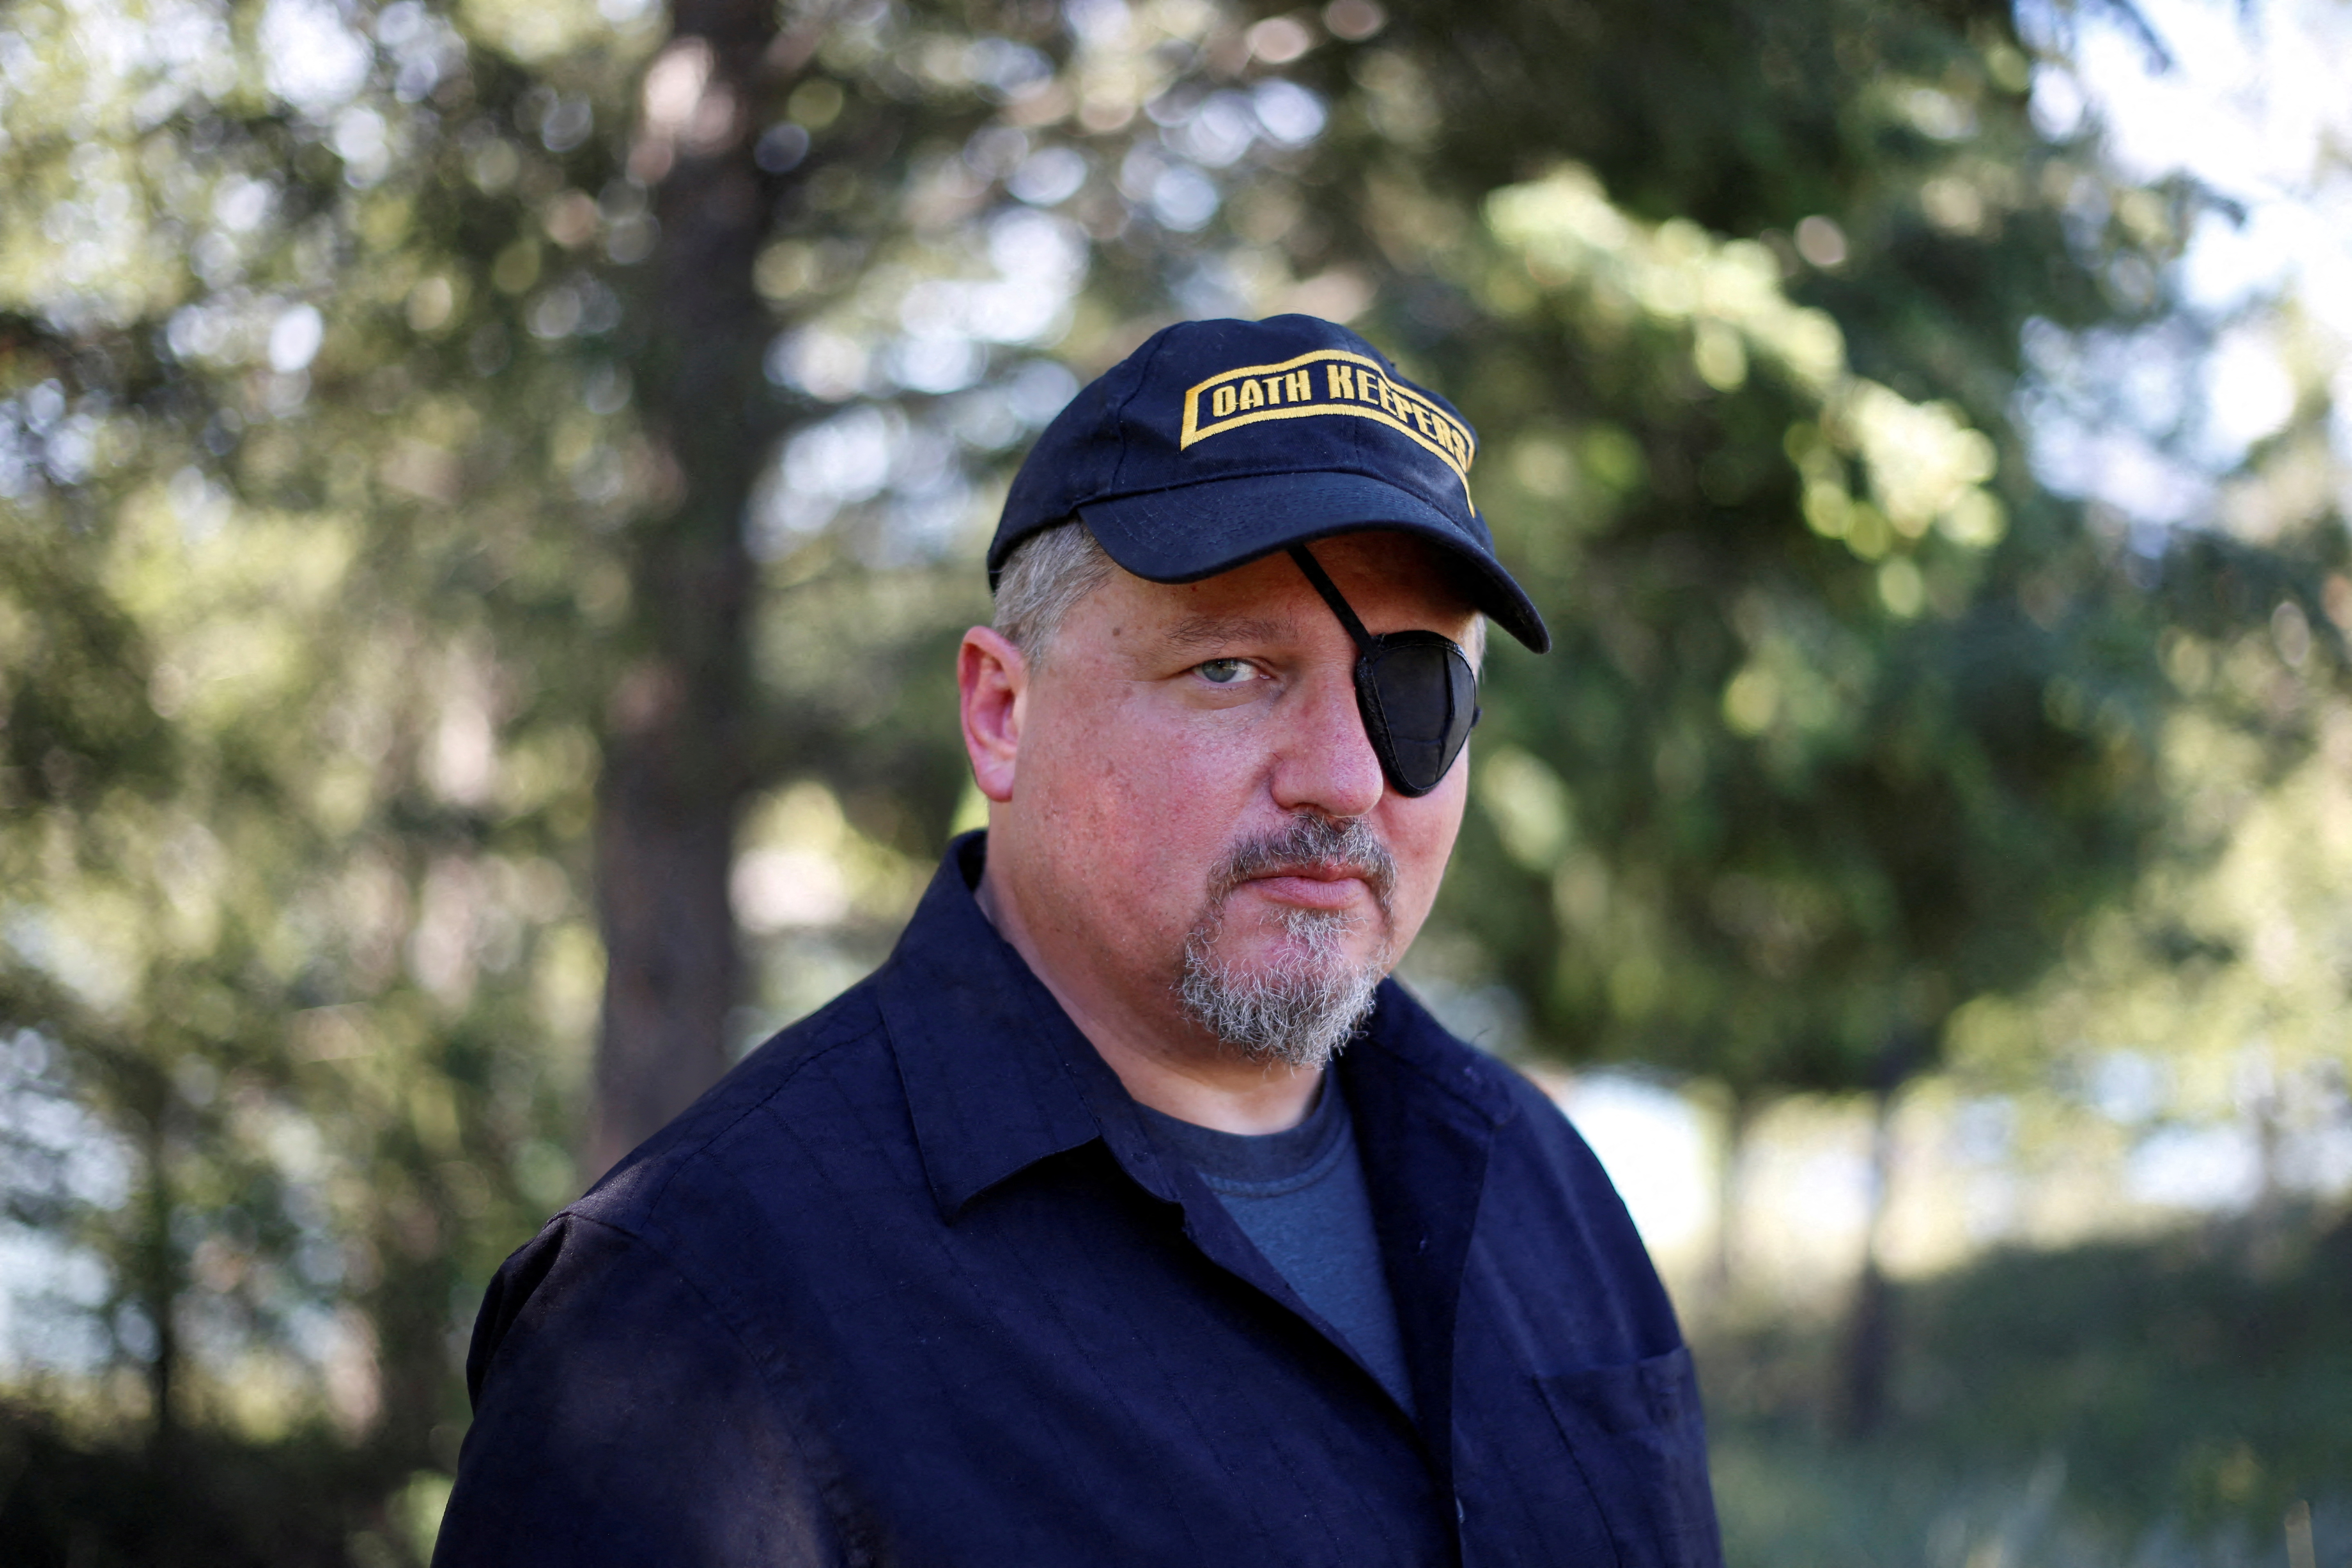 Oath Keepers militia founder Stewart Rhodes poses during an interview session in Eureka, Montana, U.S. June 20, 2016. REUTERS/Jim Urquhart/File Photo